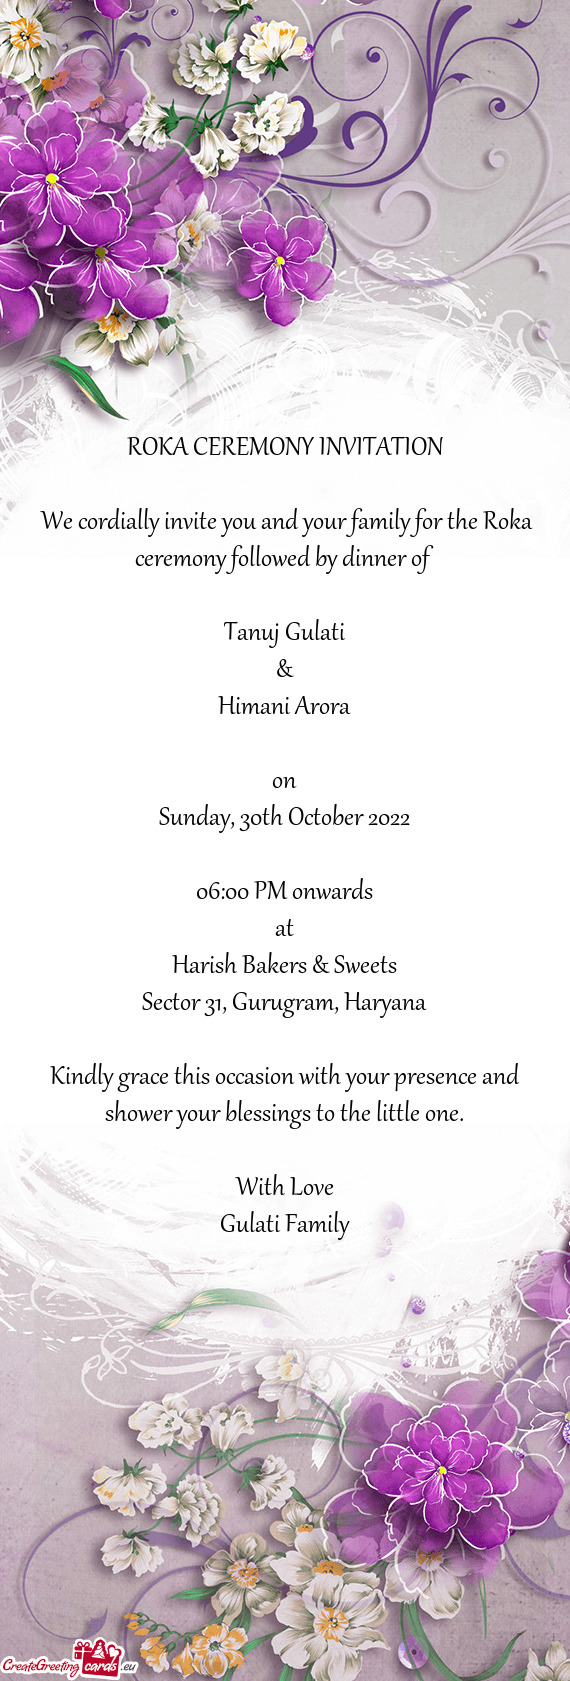 We cordially invite you and your family for the Roka ceremony followed by dinner of